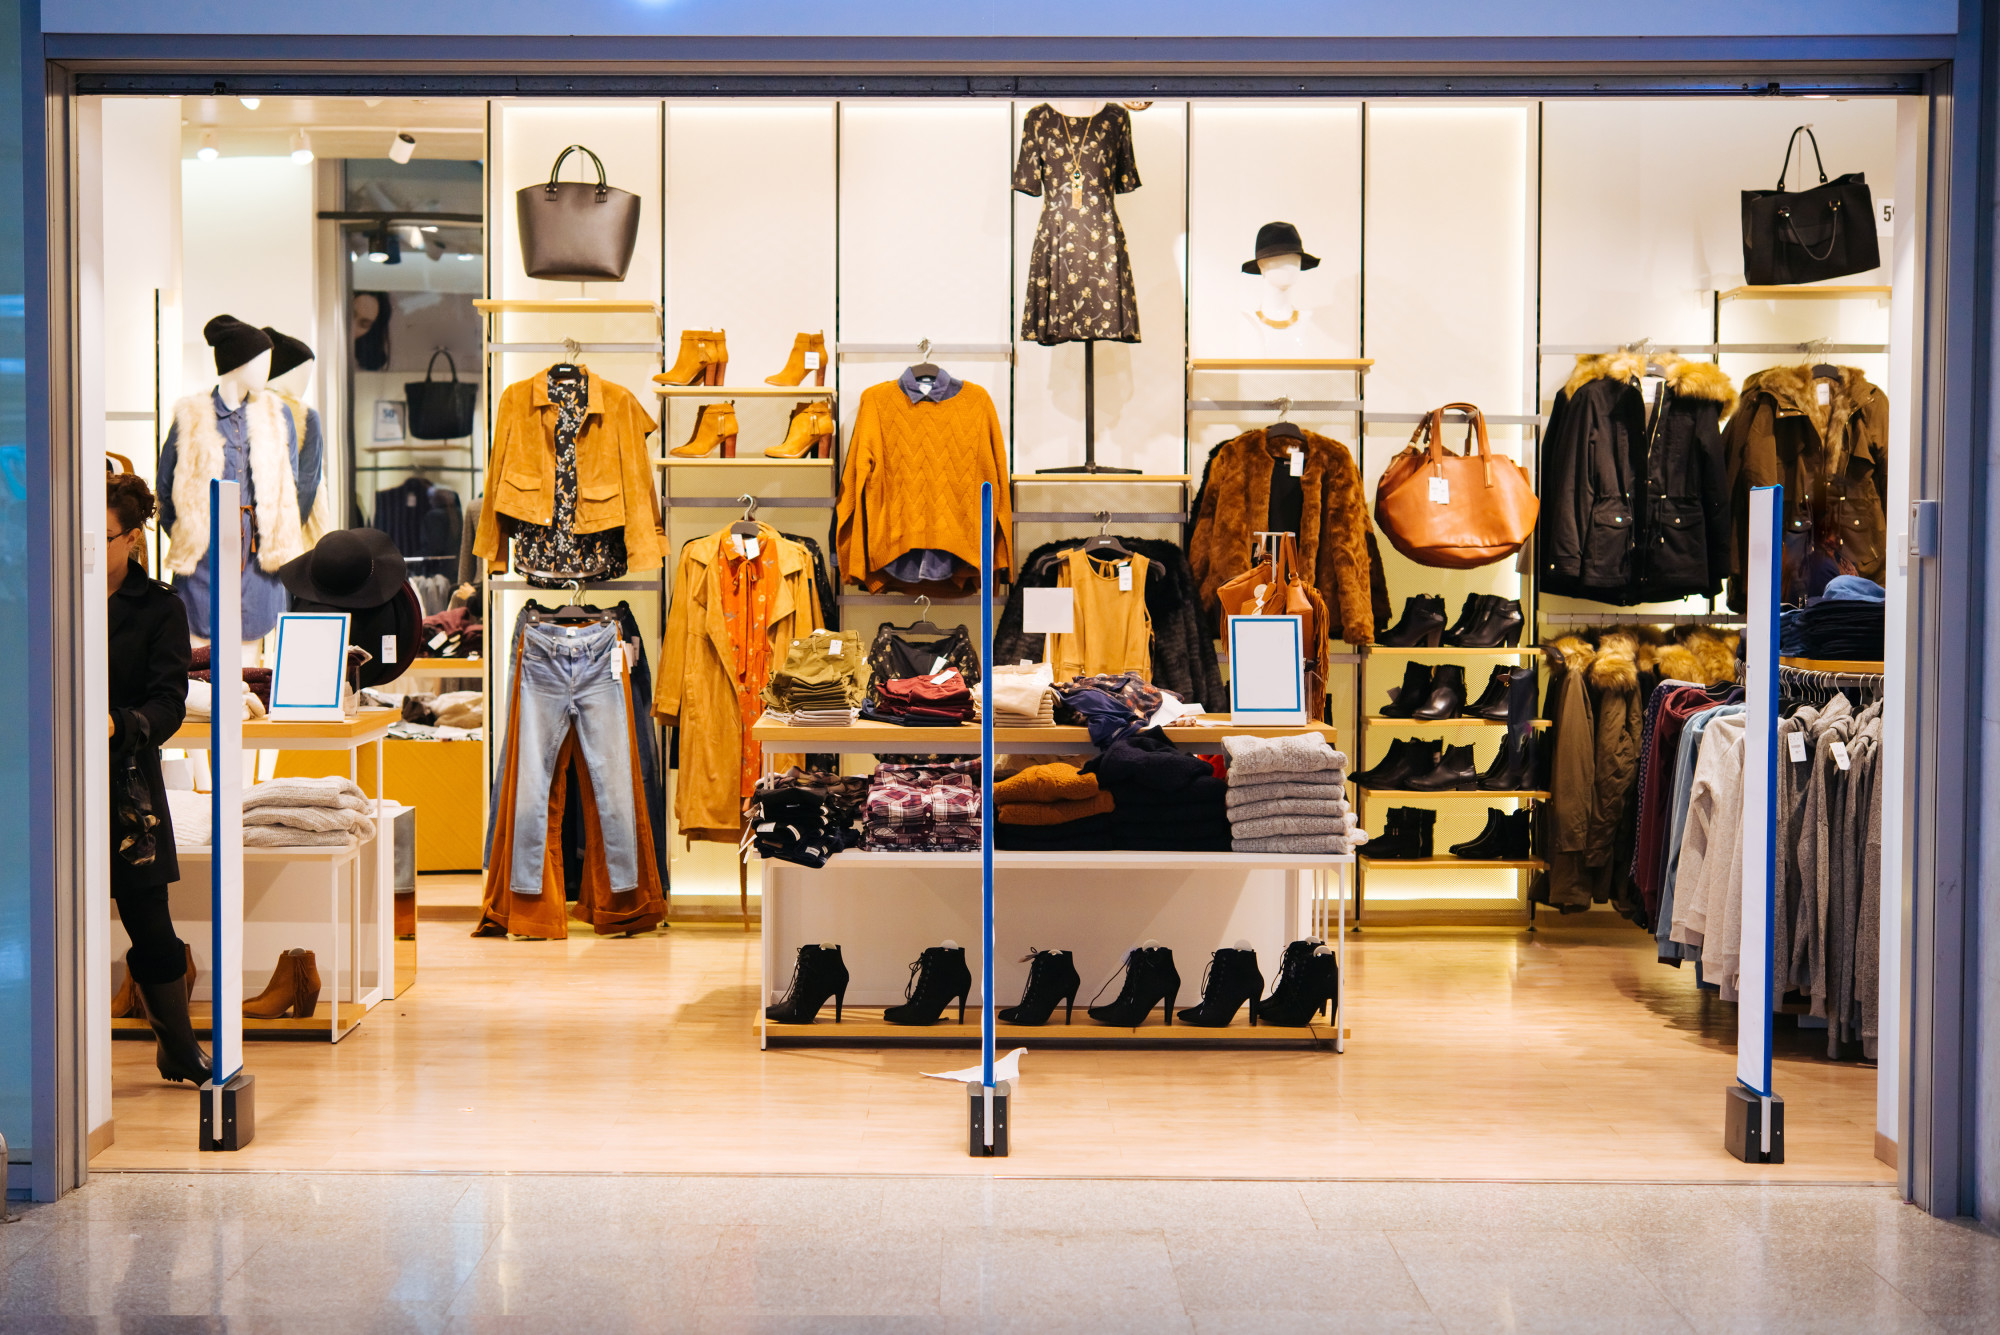 The latest retail store design ideas to attract customers - AZ Big Media